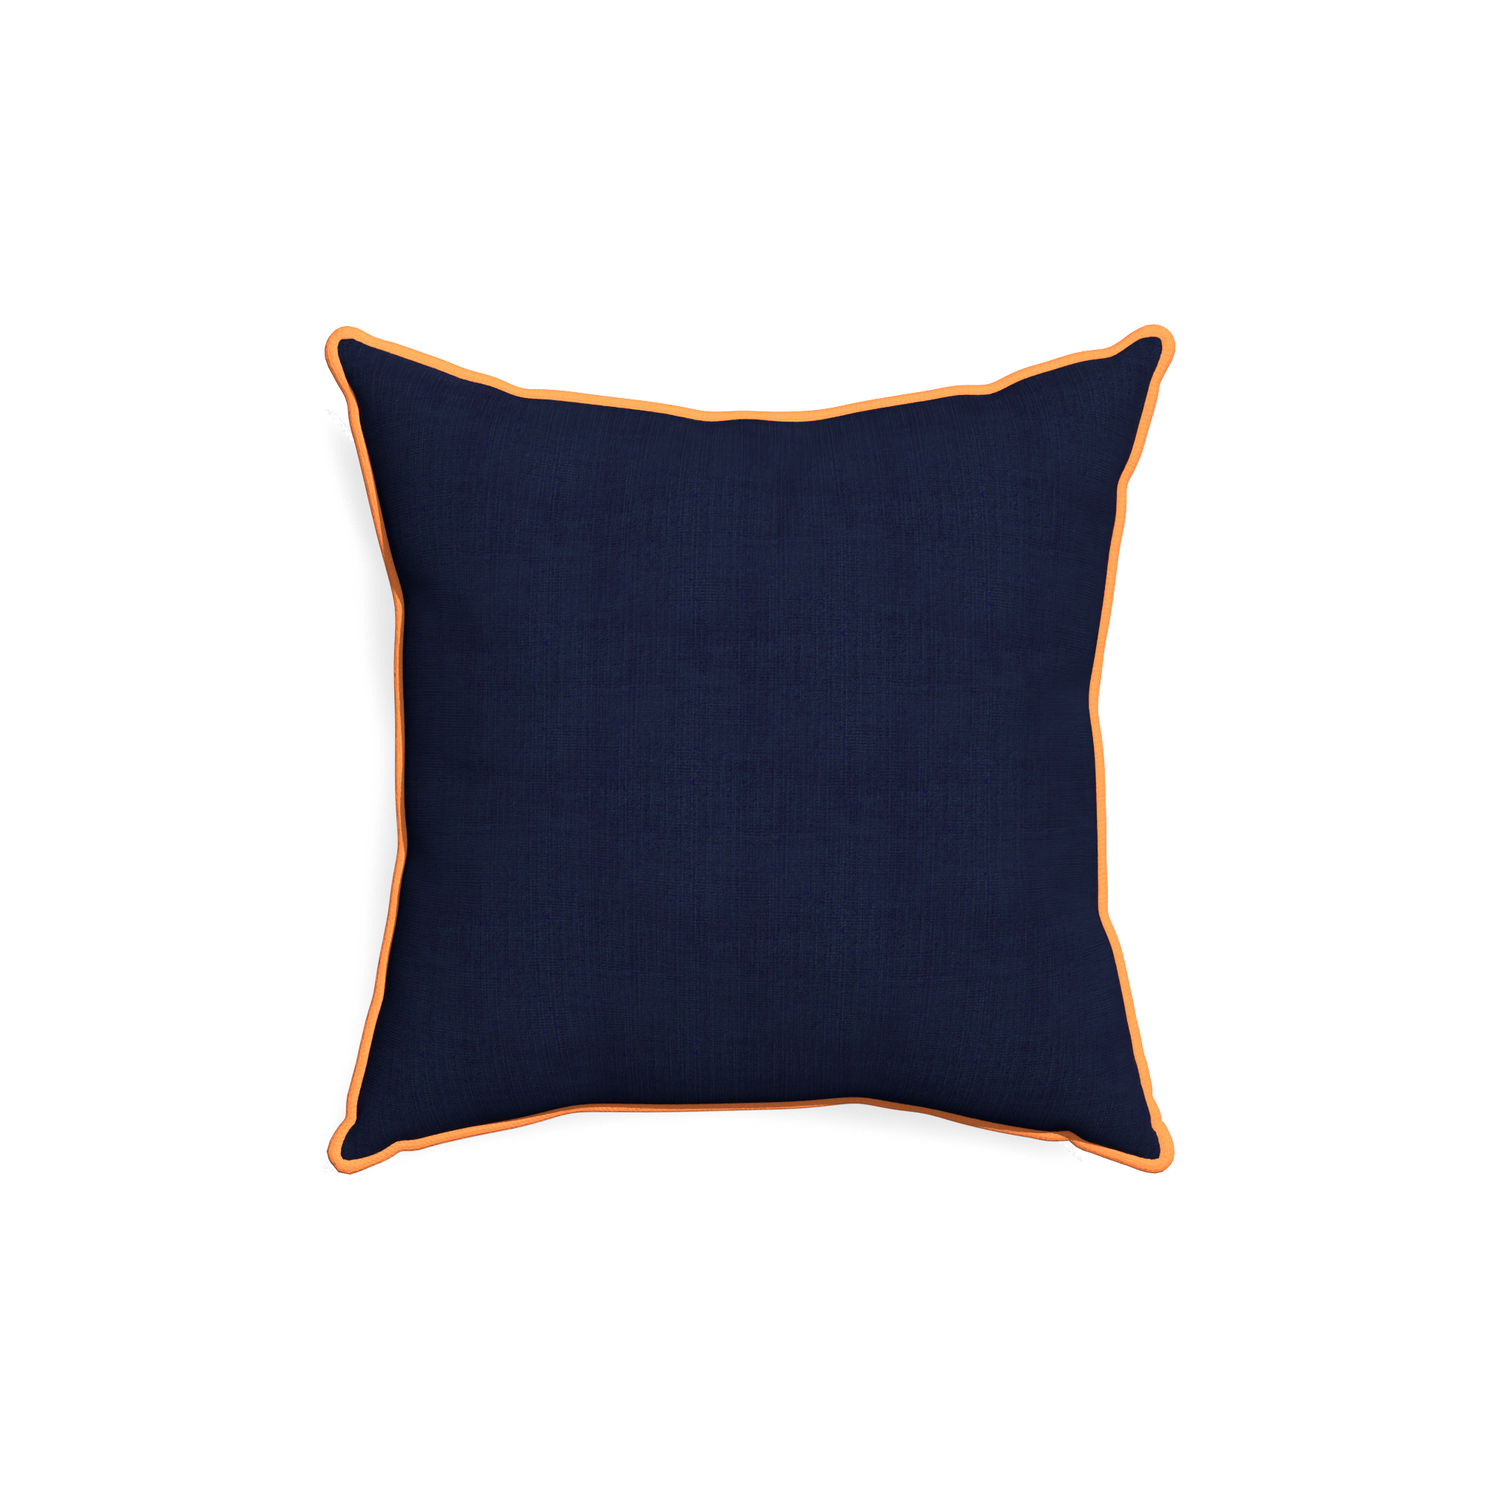 18-square midnight custom navy bluepillow with clementine piping on white background